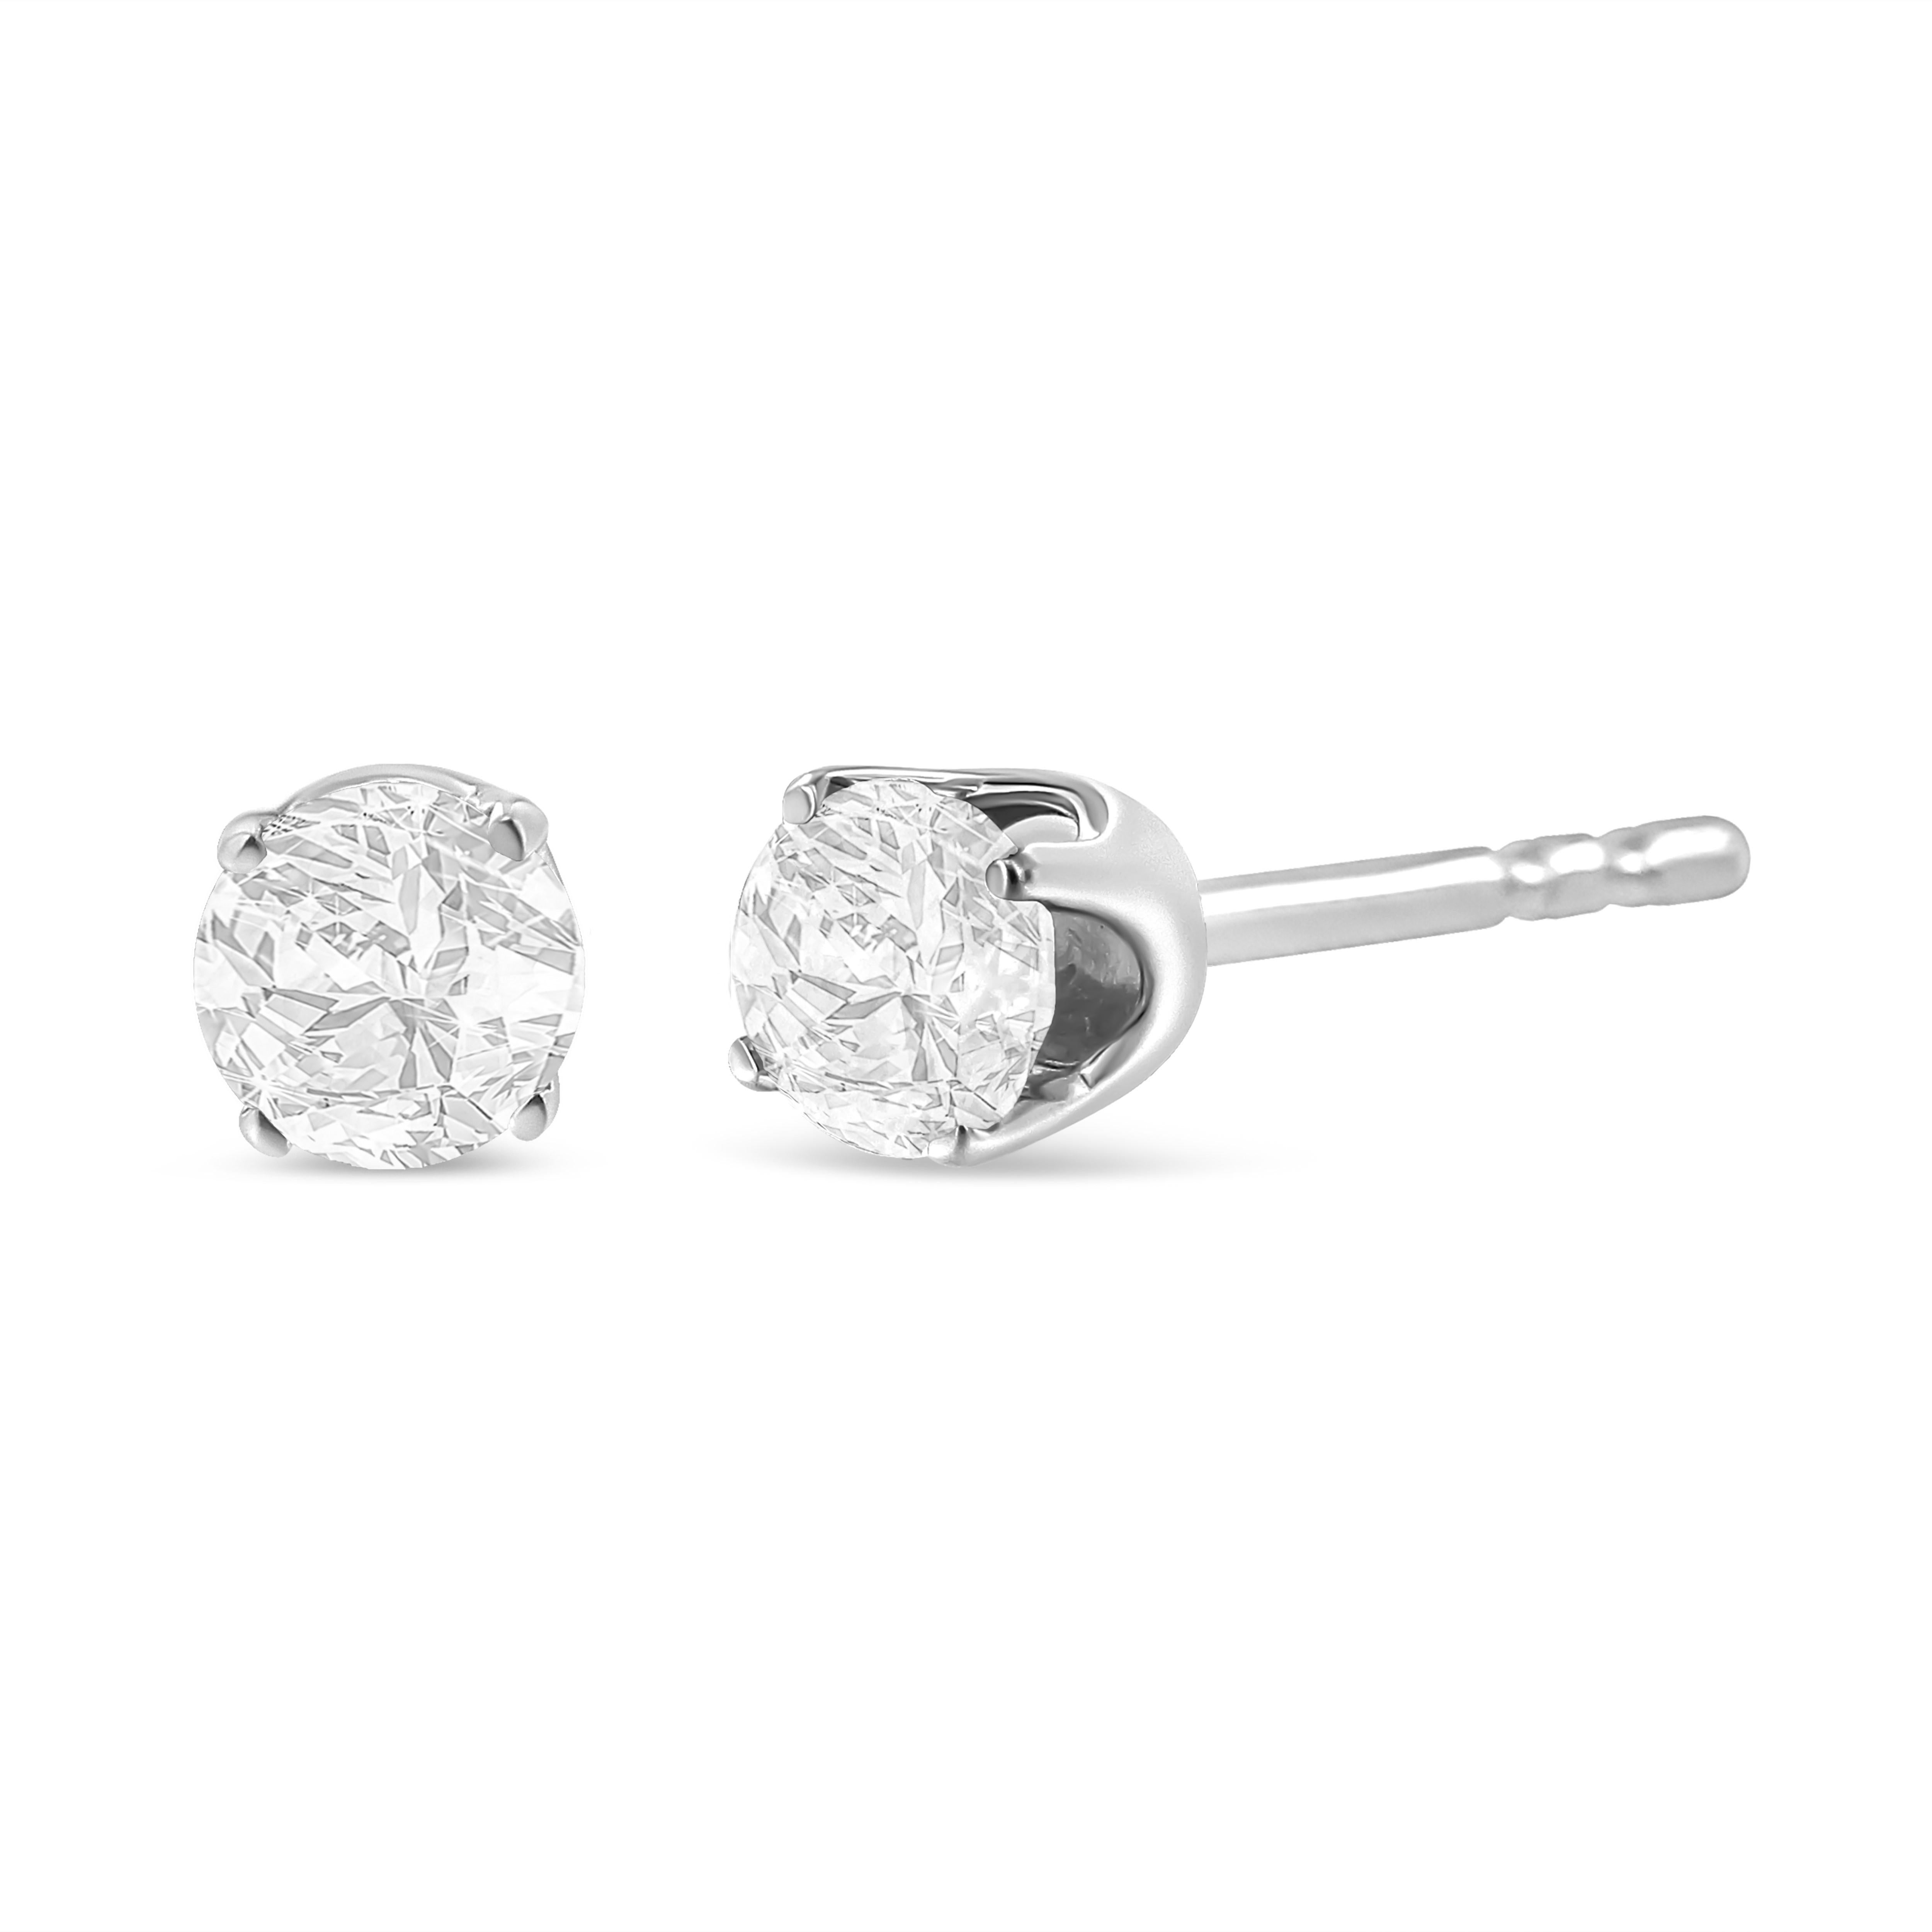 Experience the epitome of elegance with our AGS Certified Diamond Stud Earrings, designed exclusively for the Haus of Brilliance. Crafted with an undeniable dedication to quality, these earrings are a testament to the timeless beauty of natural